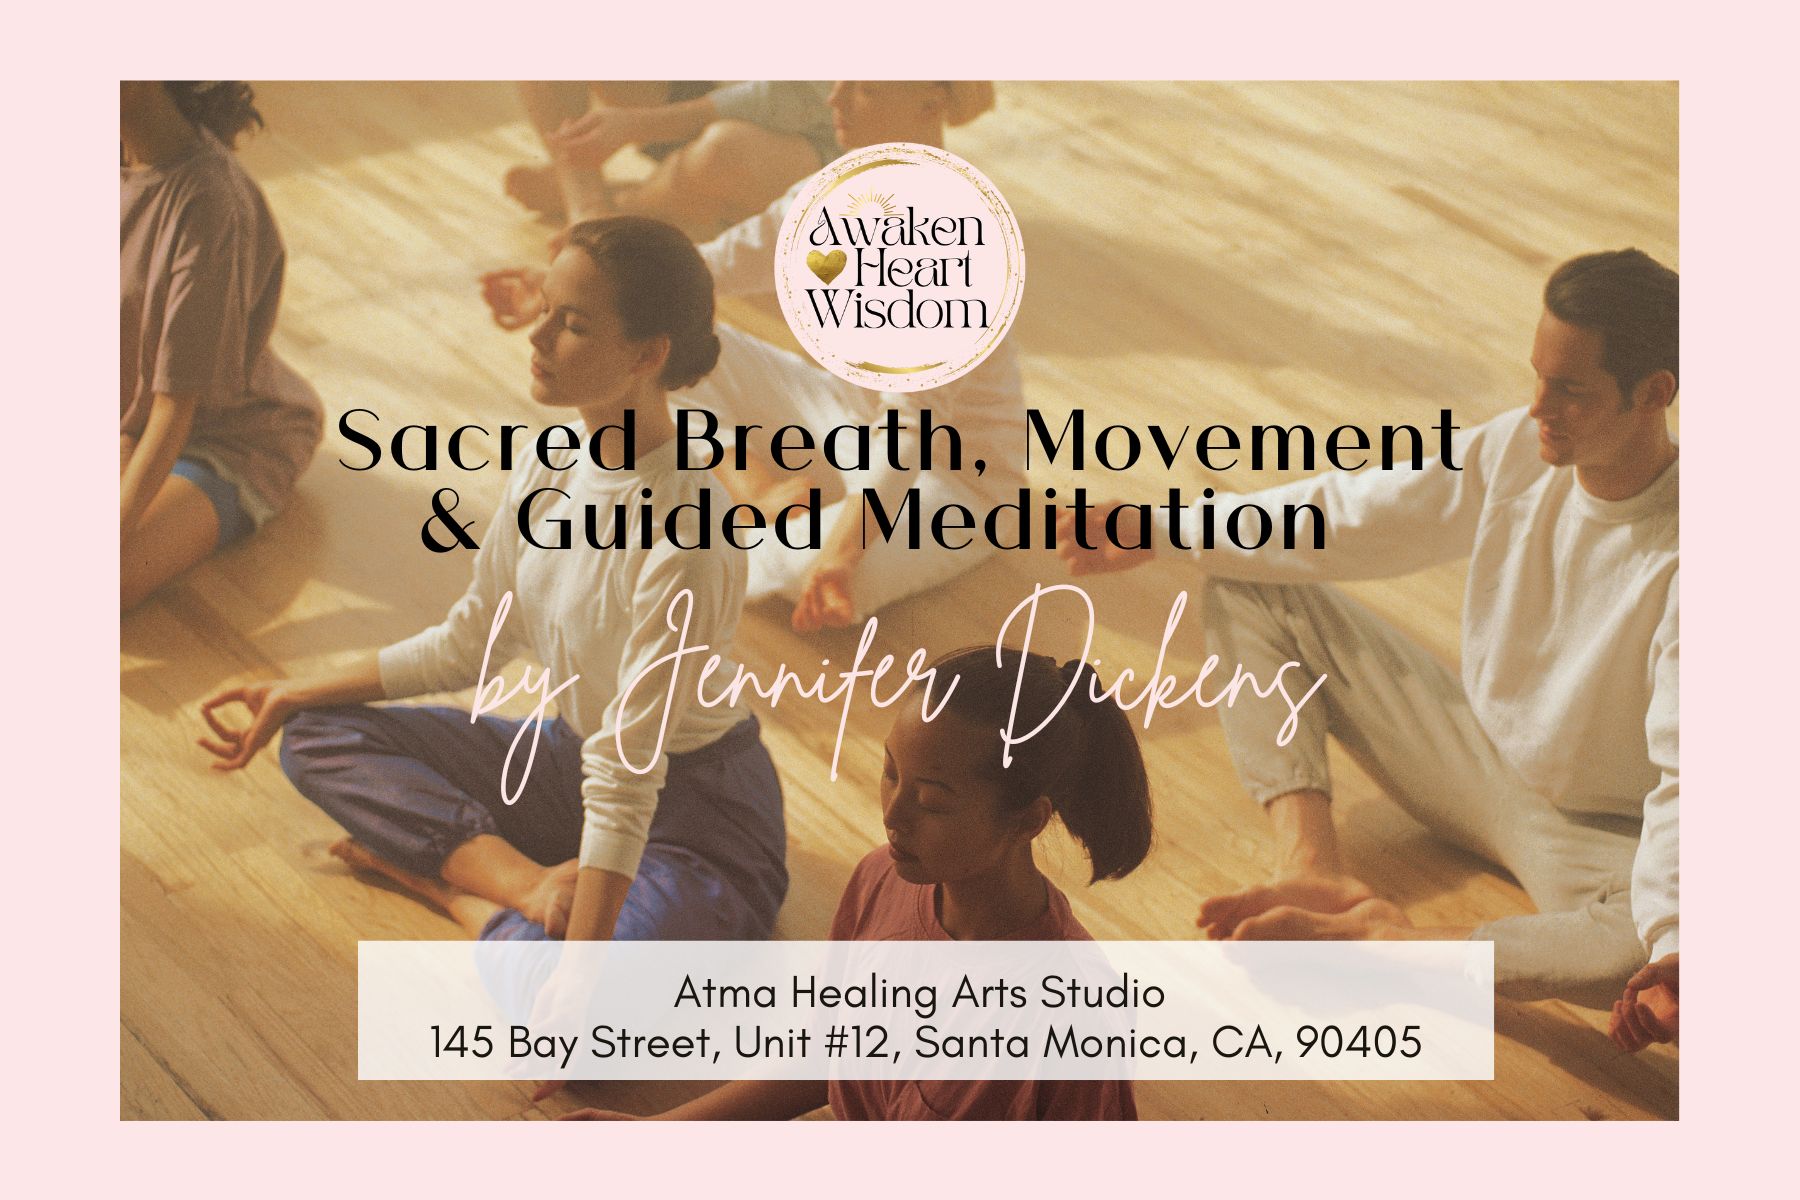 Sacred Breath, Movement & Guided Meditation class